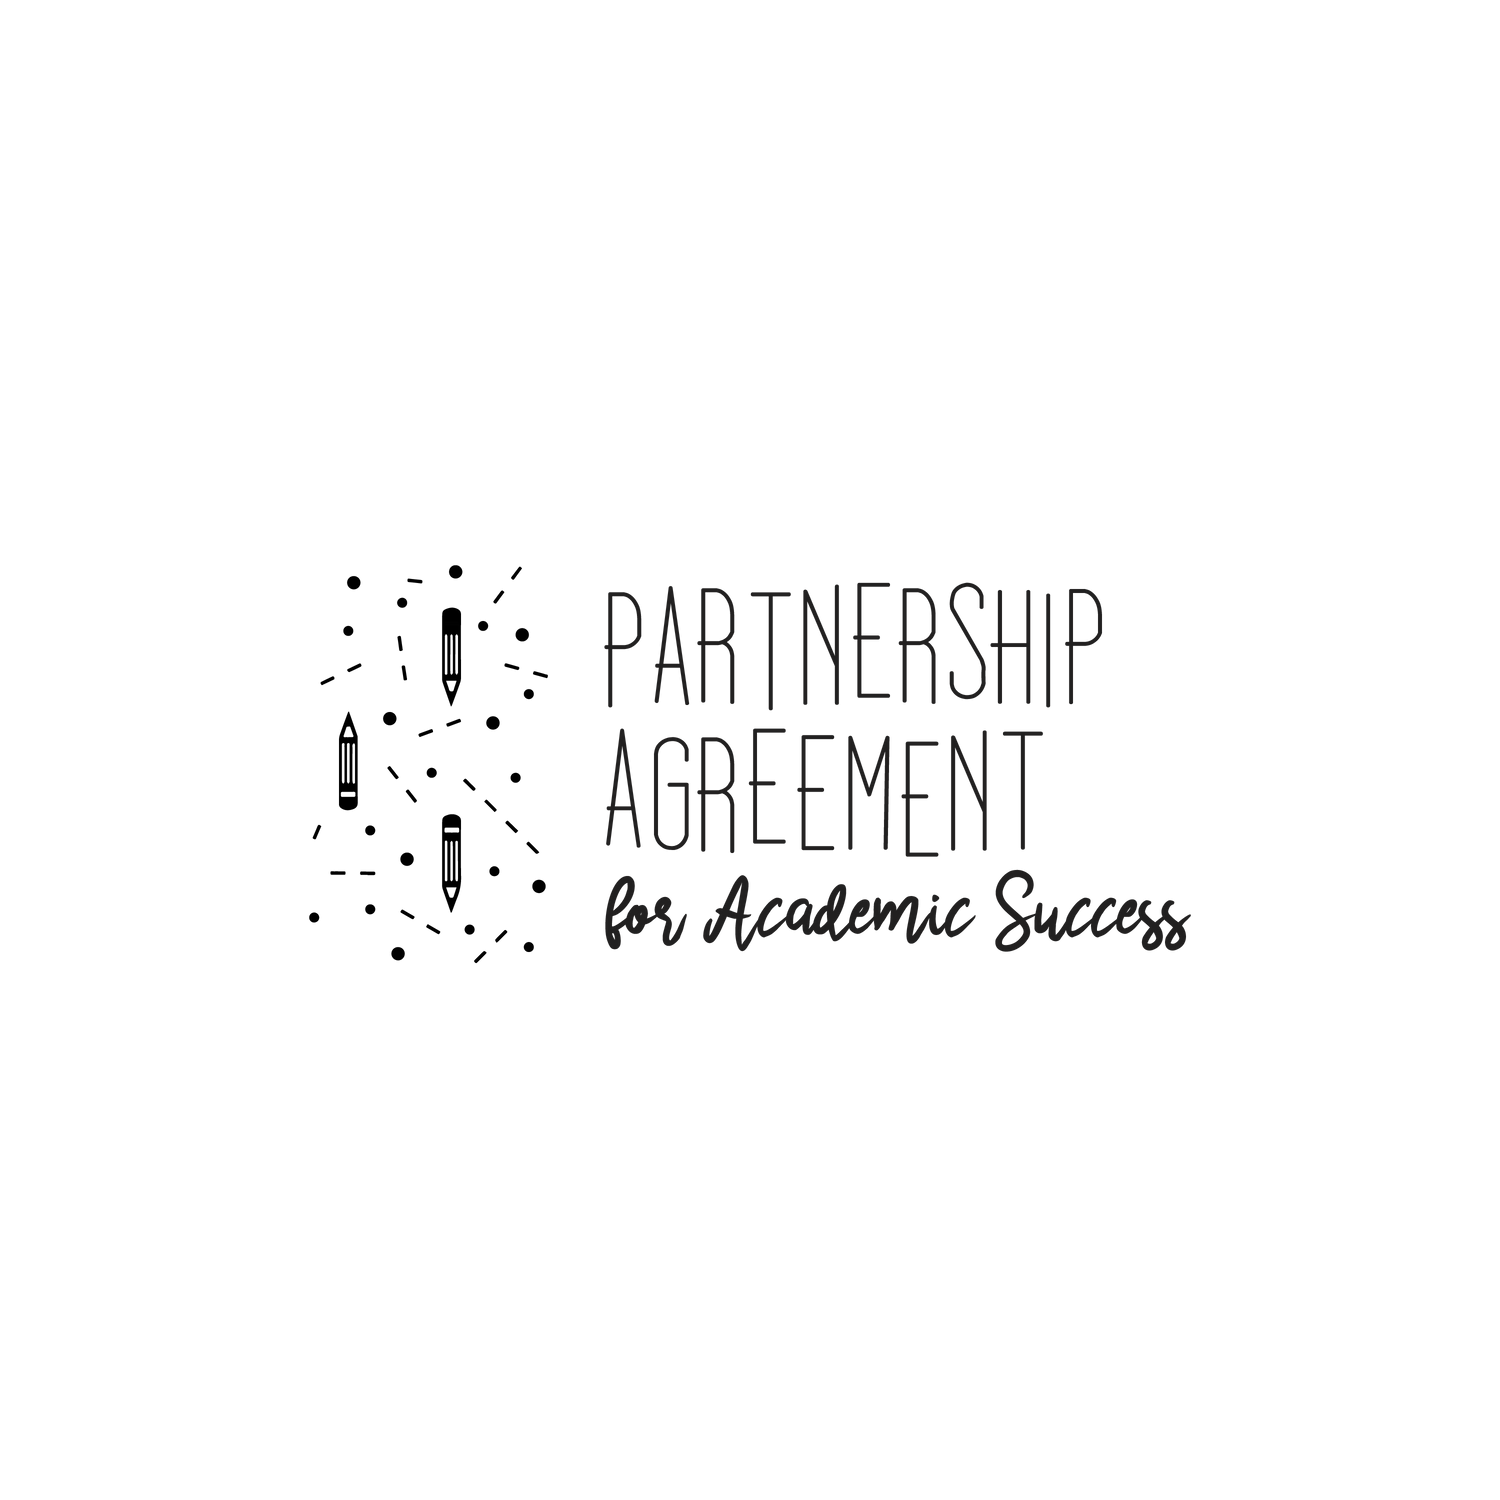 English version of the logo of the partnership agreement for academic success document made by Les Belles Combines